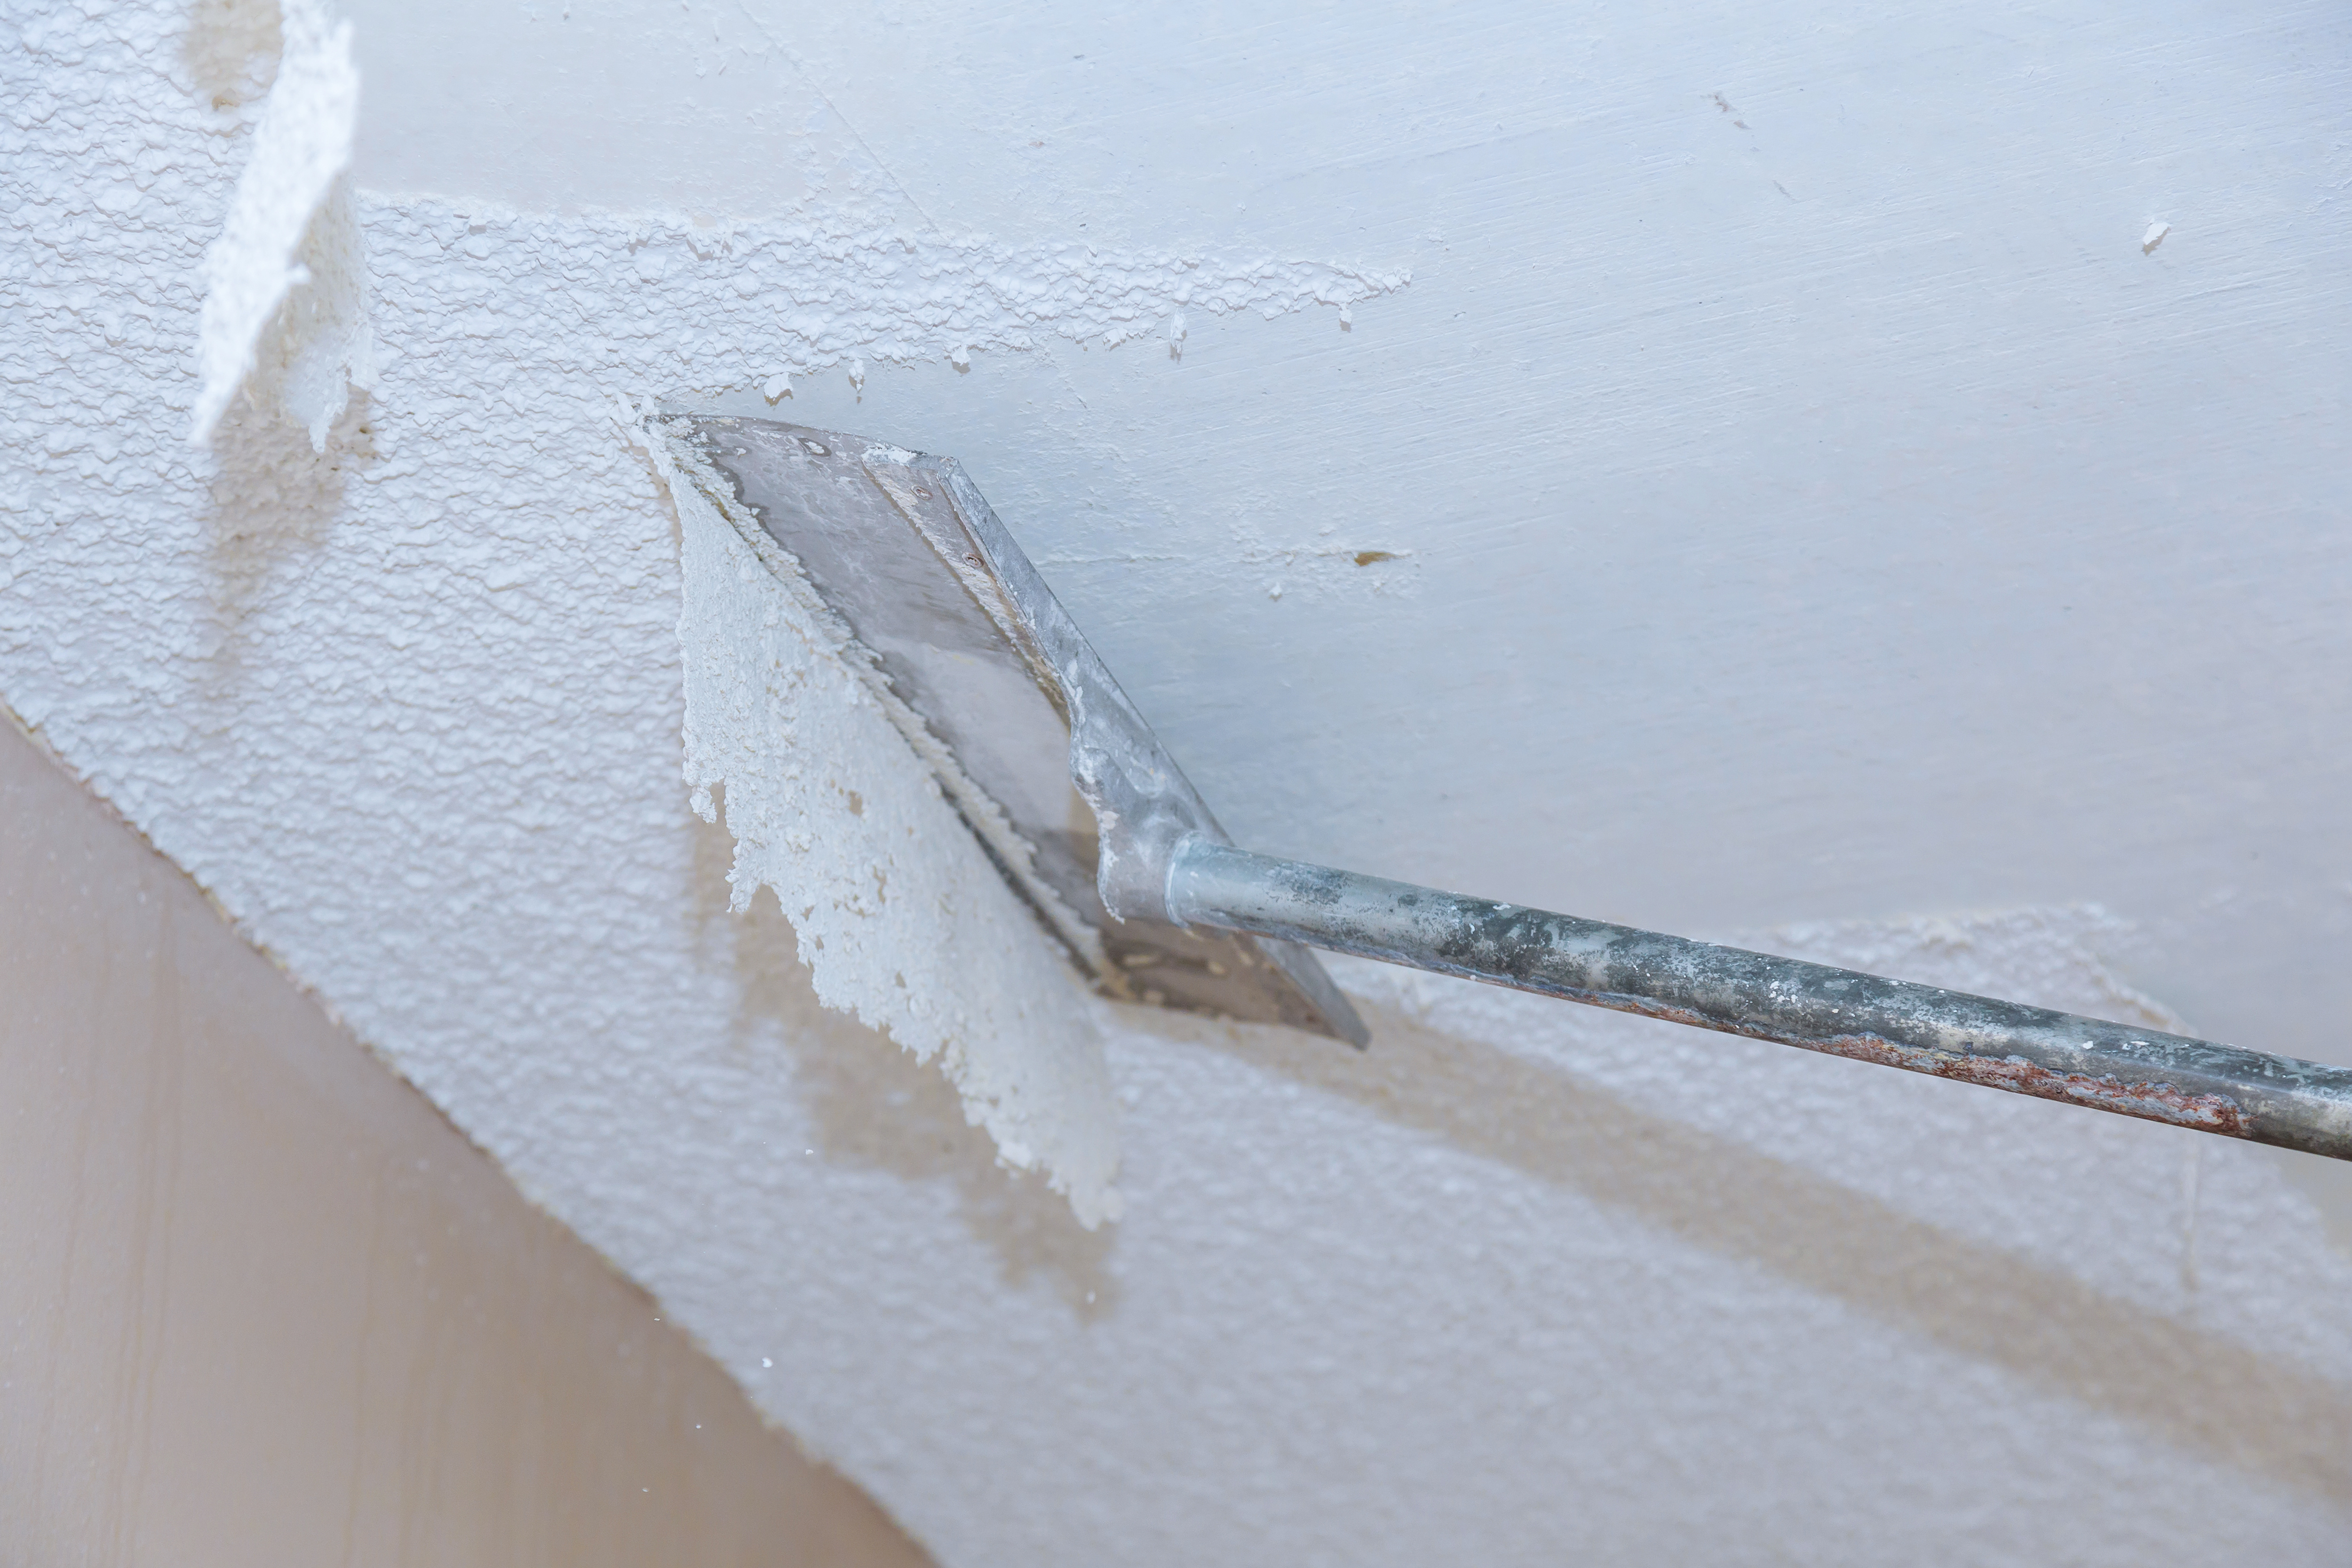 Popcorn removal is not required to install planks over a popcorn ceiling.